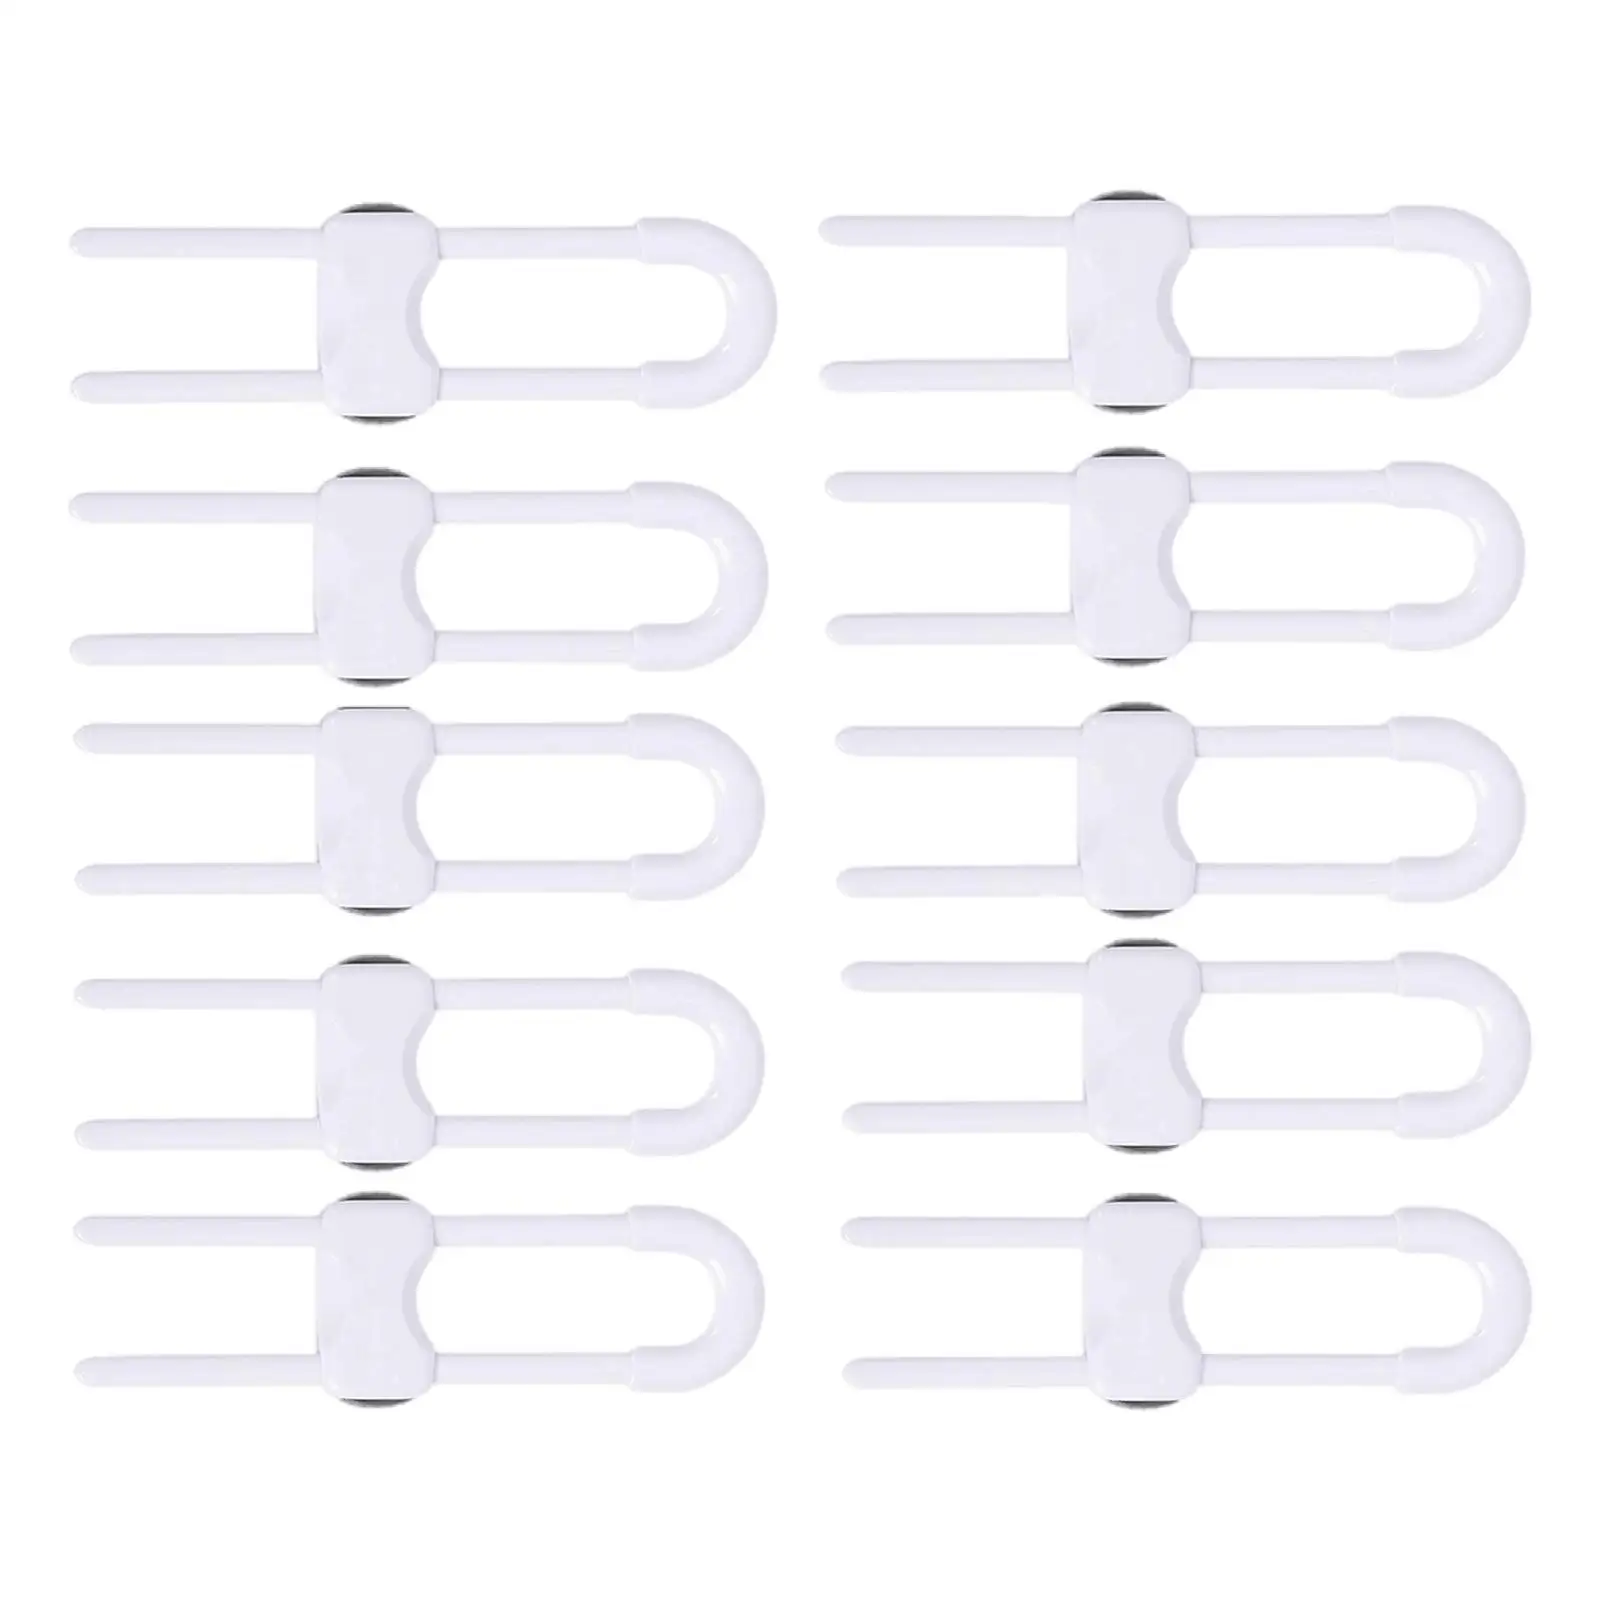 

10 Pieces Baby Proofing latches White U-Shaped Sliding Cabinet Locks for Cupboard Drawers Windows Cabinet Home